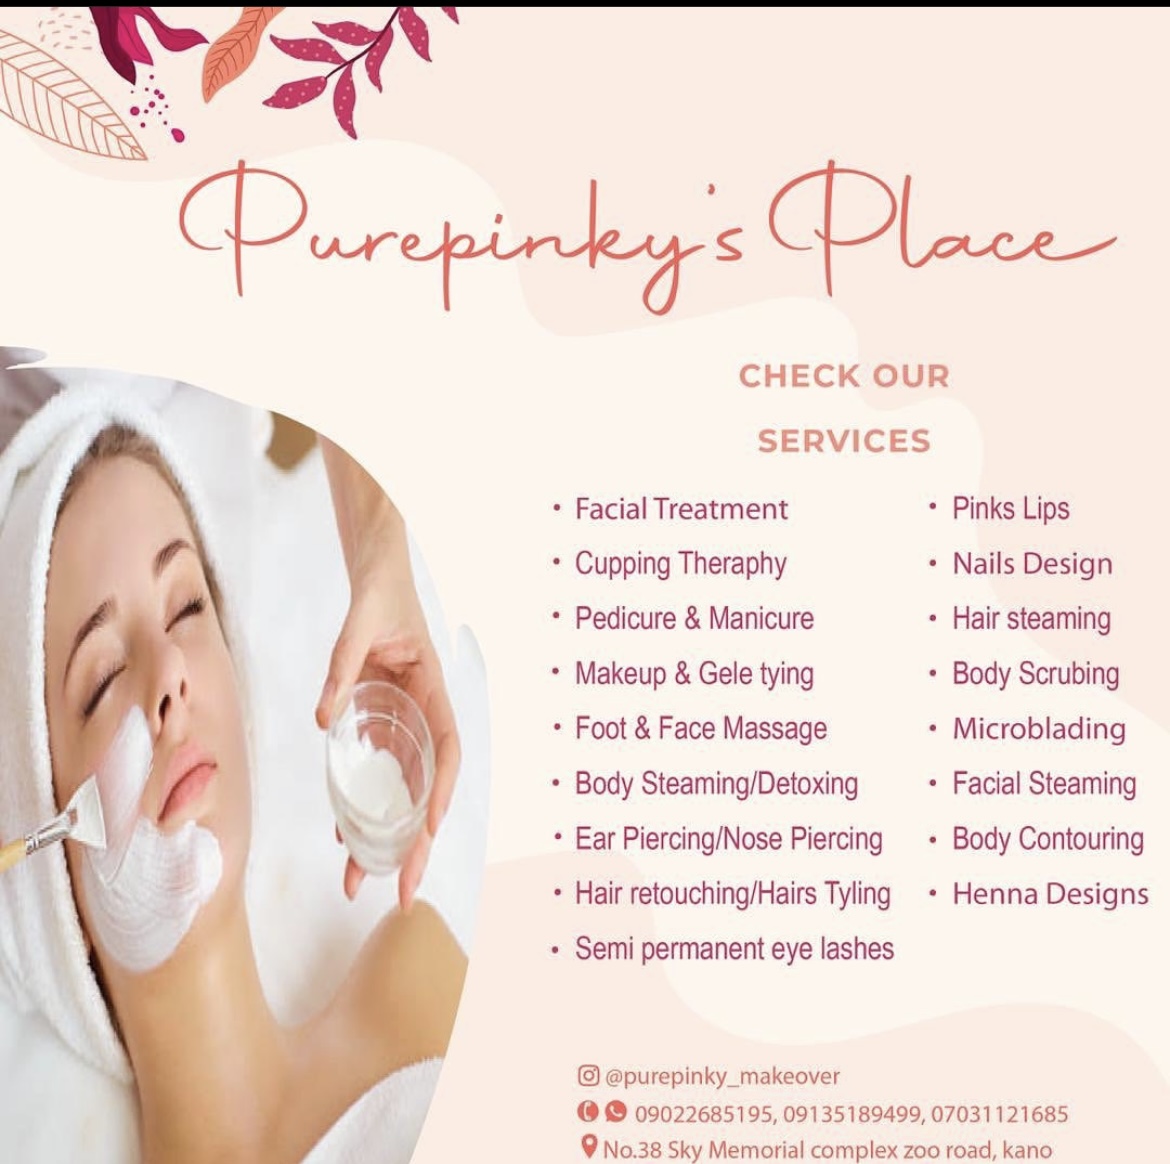 Purepinky’s place provider